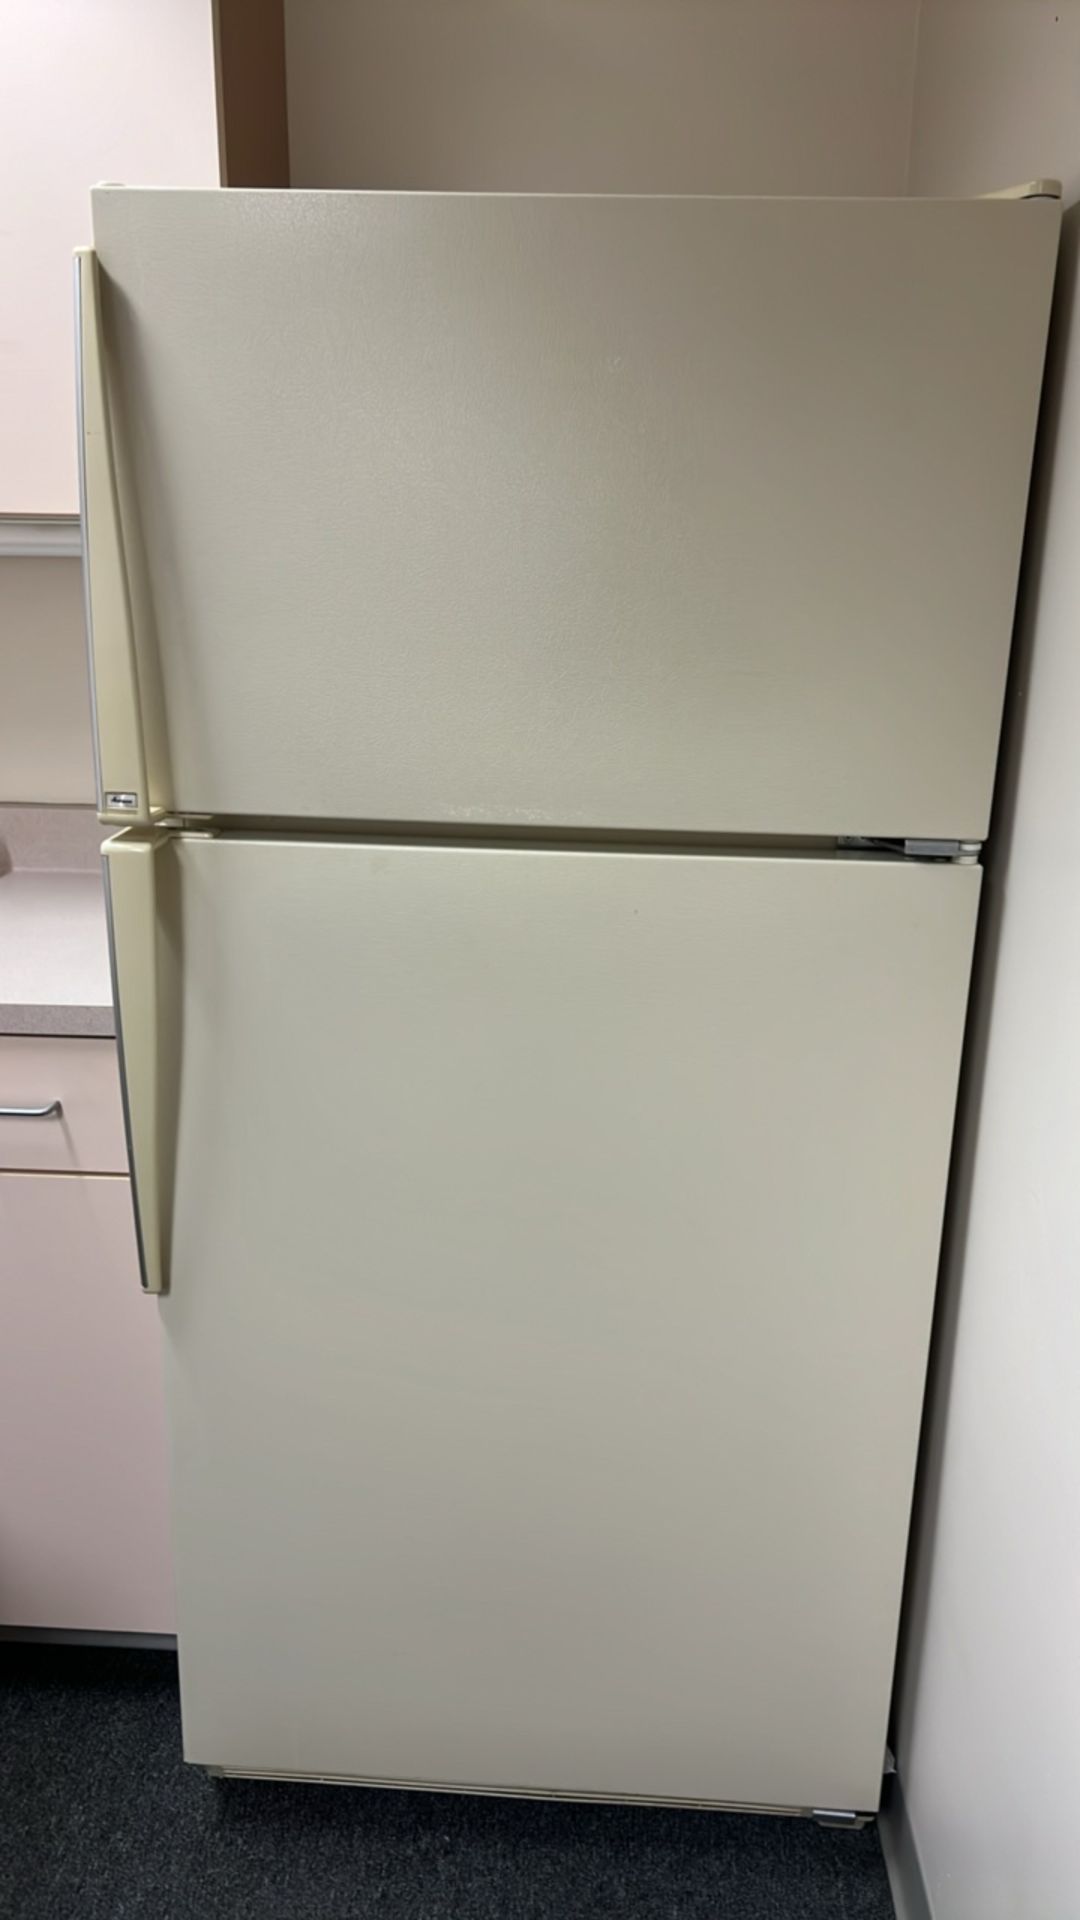 STAFF LOUNGE TO INCLUDE: AMANA HOUSEHOLD REFRIGERATOR/FREEZER, TABLES, CHAIRS, BULLETIN BOARD, - Image 2 of 4